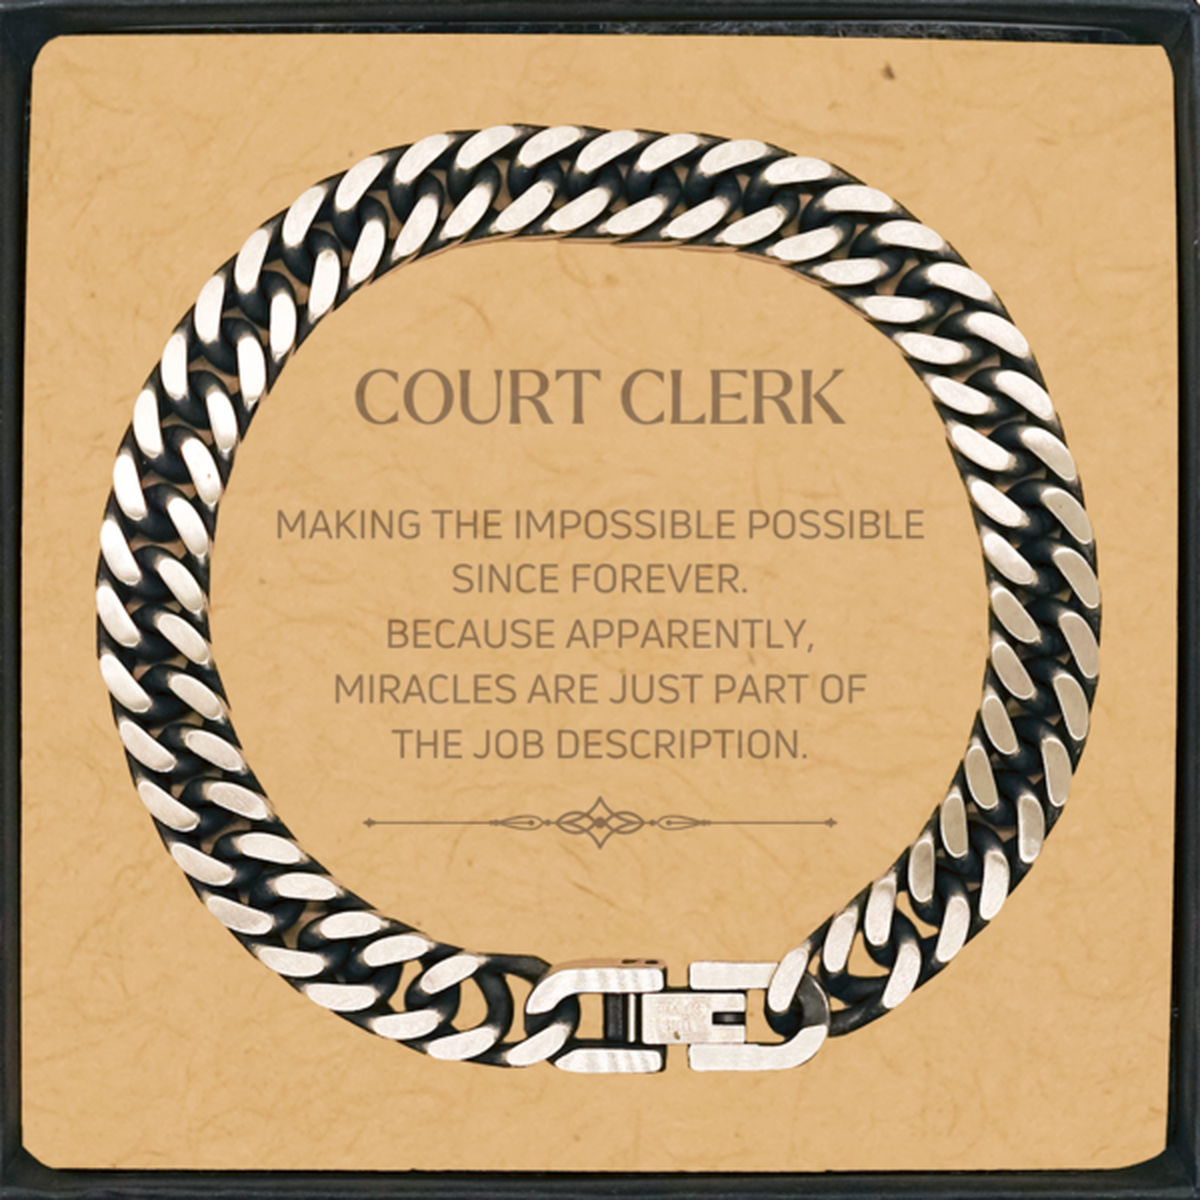 Funny Court Clerk Gifts, Miracles are just part of the job description, Inspirational Birthday Cuban Link Chain Bracelet For Court Clerk, Men, Women, Coworkers, Friends, Boss